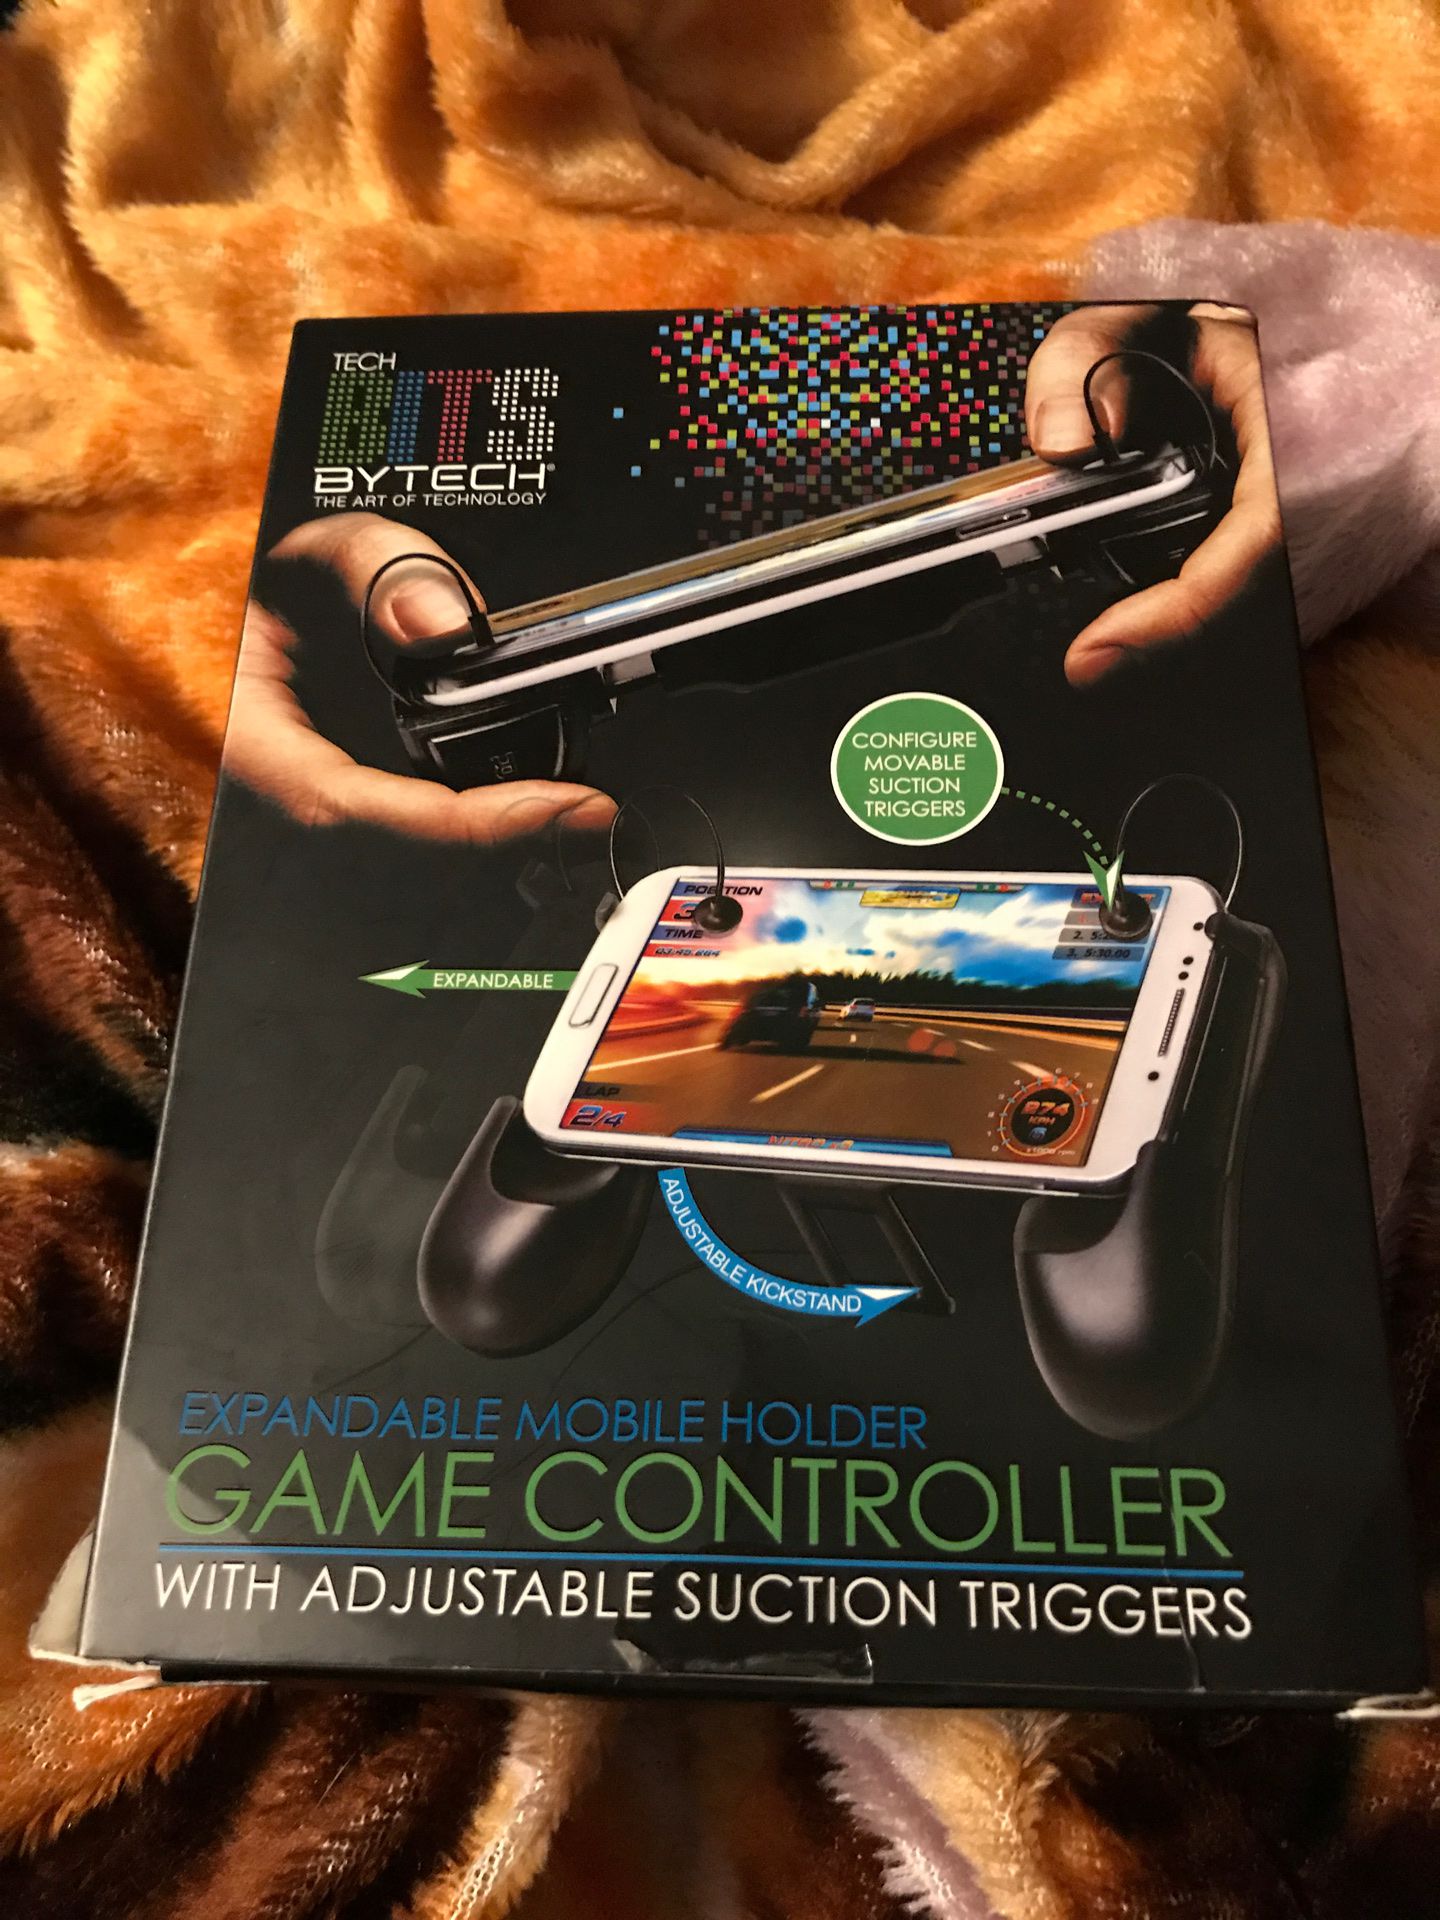 A game controller u can hook up to your phone